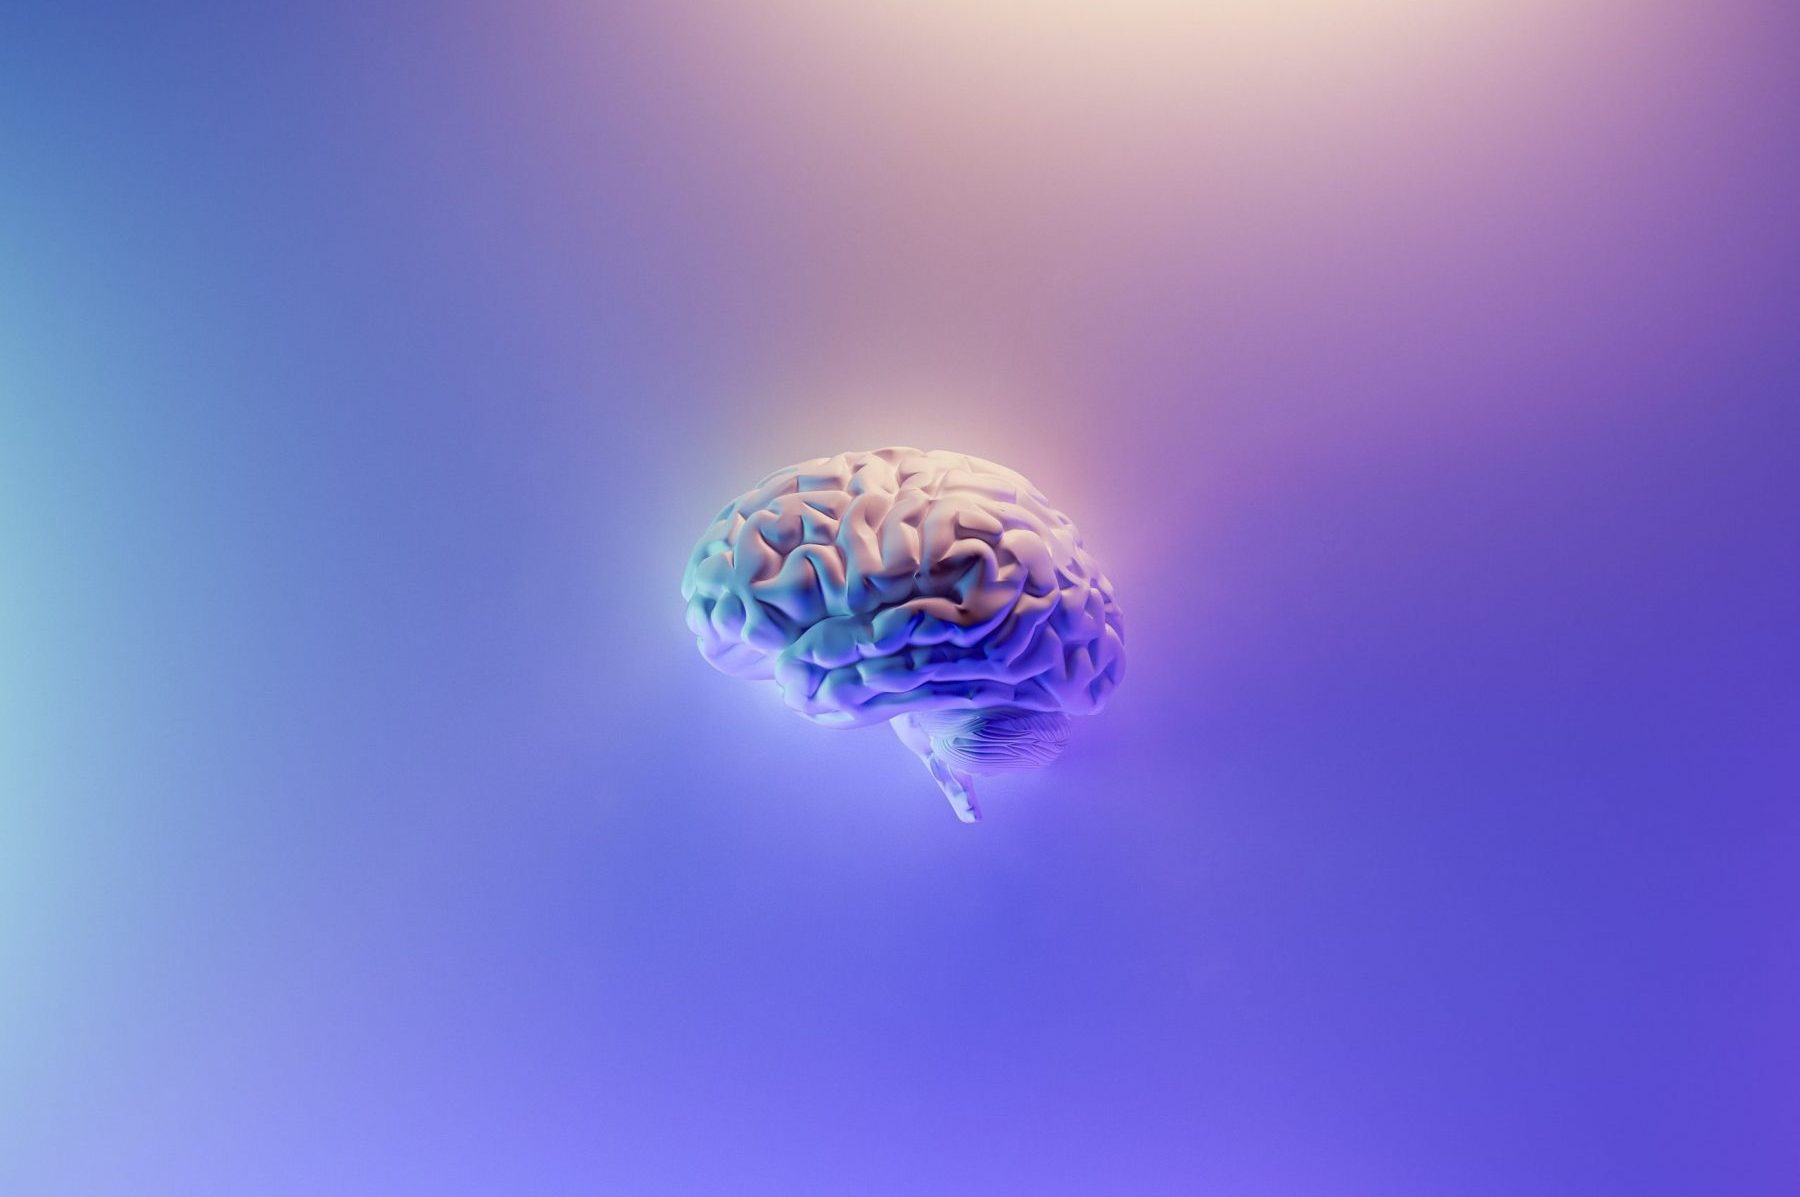 in an article about cognitive performance, an image of a brain